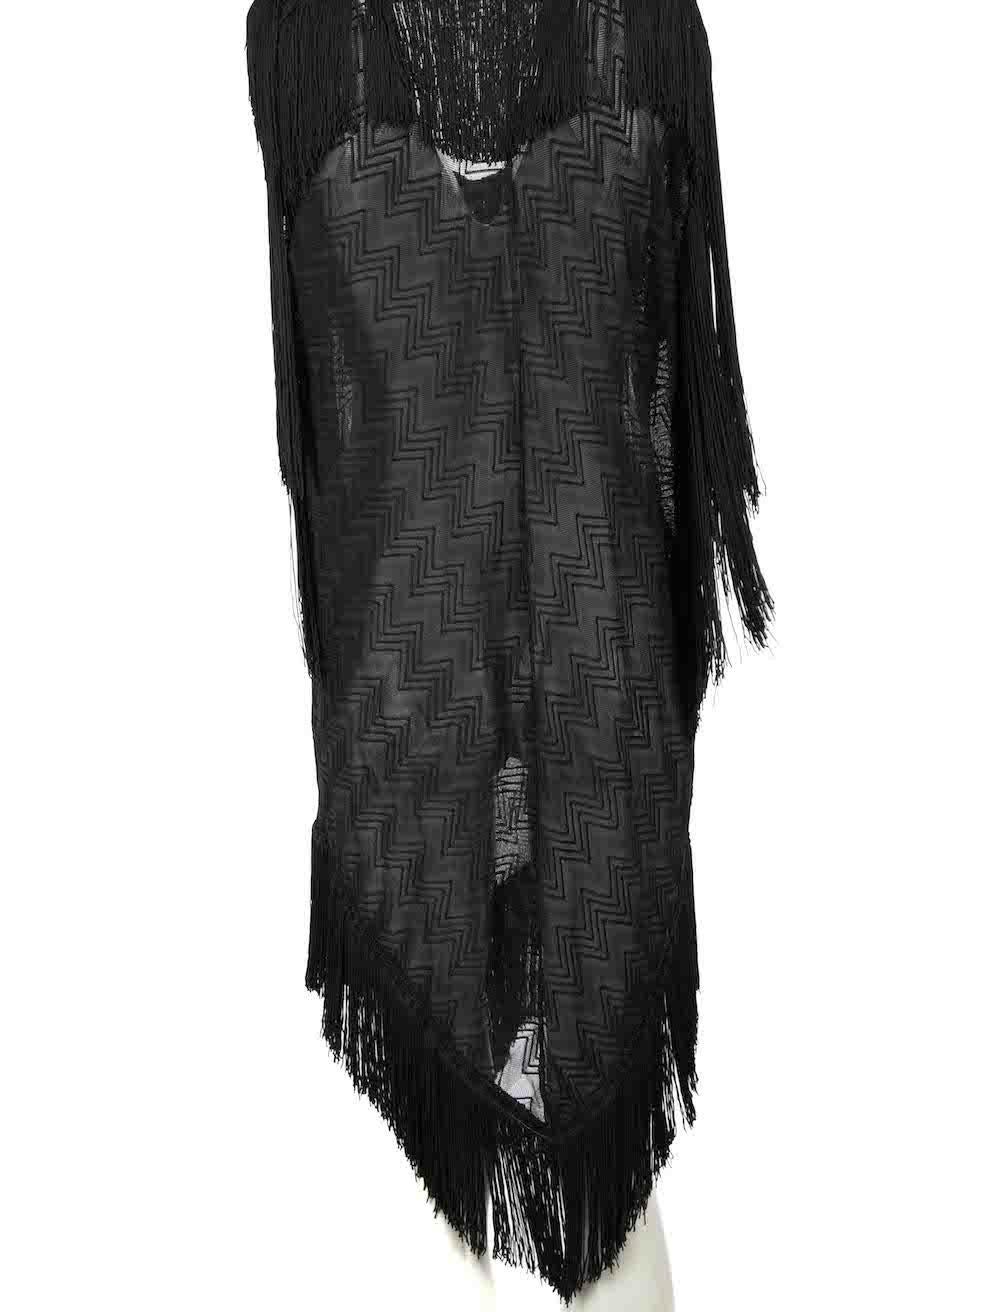 Missoni Missoni Mare Black Fringe Pattern Sheer Cover Up Size S In Excellent Condition In London, GB